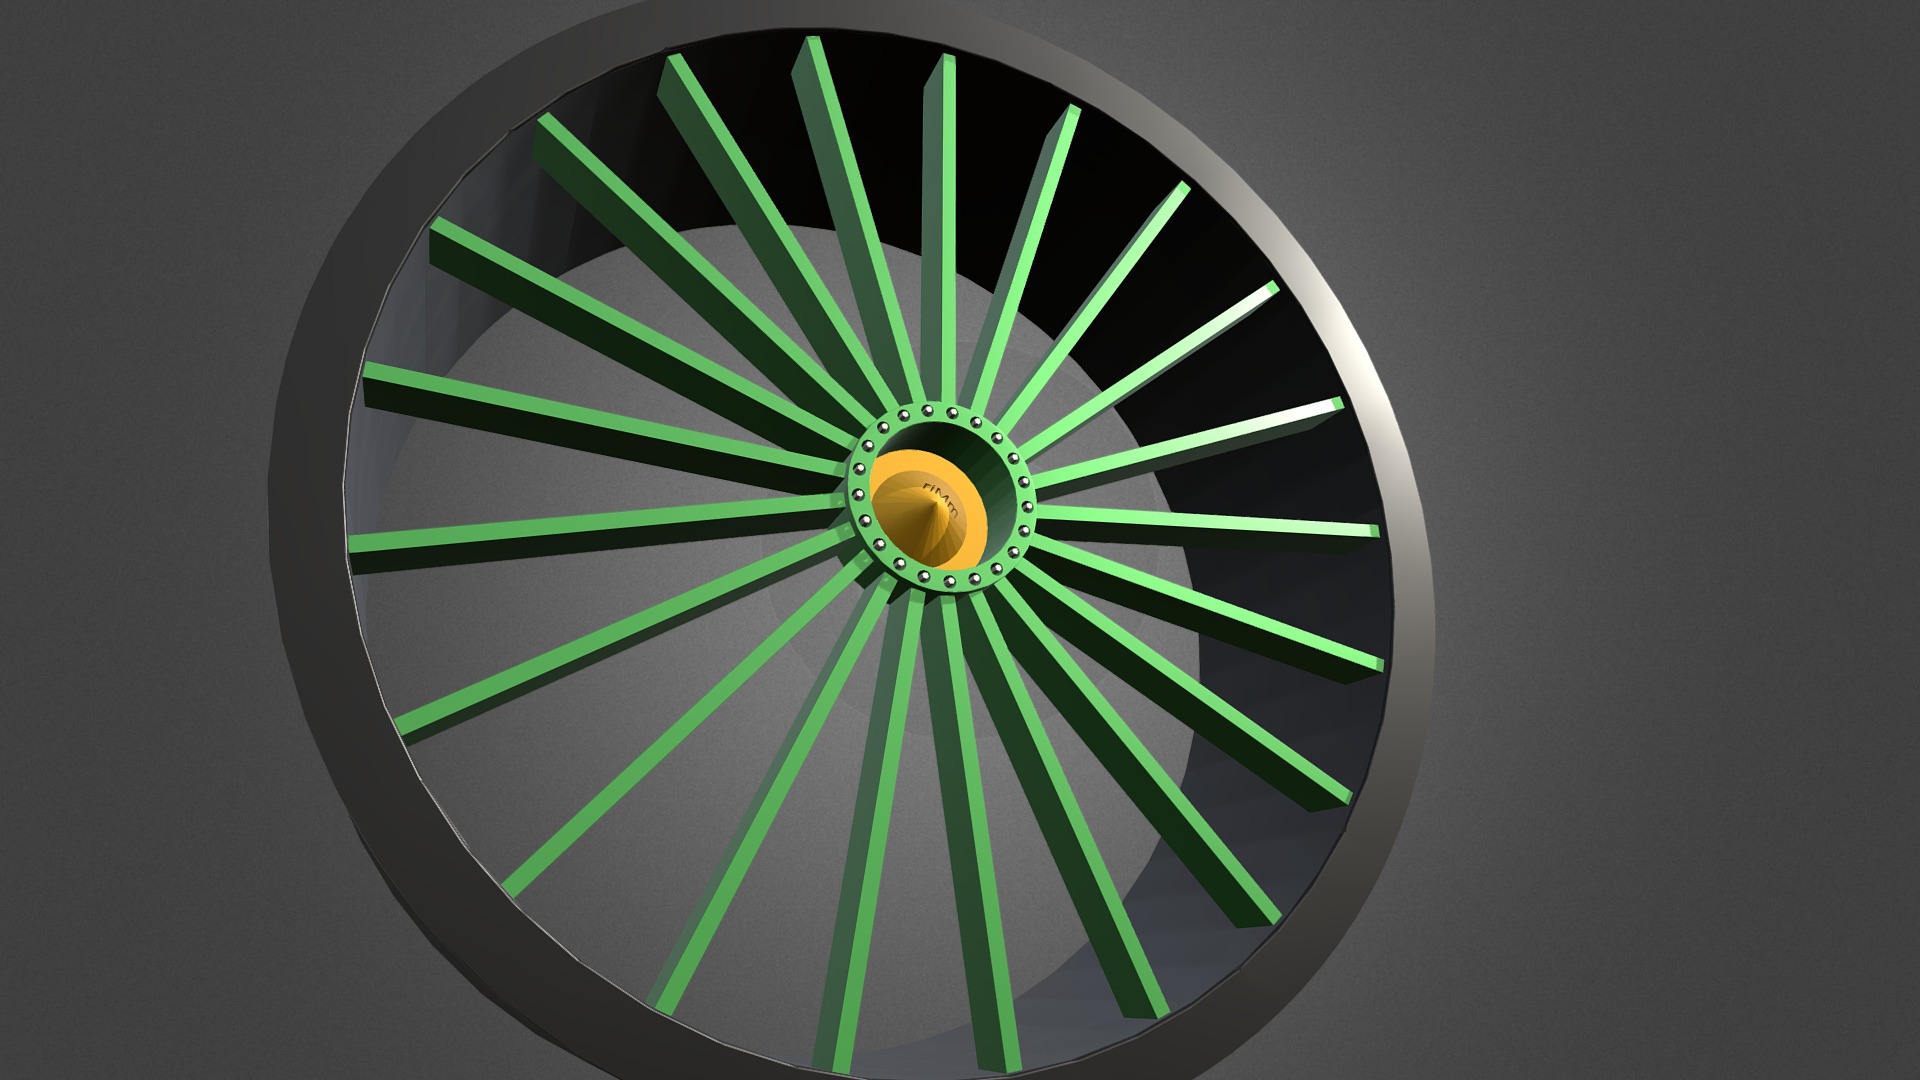 3D model Slim Wheel / Racing Wheels - This is a 3D model of the Slim Wheel / Racing Wheels. The 3D model is about a green and black fan.